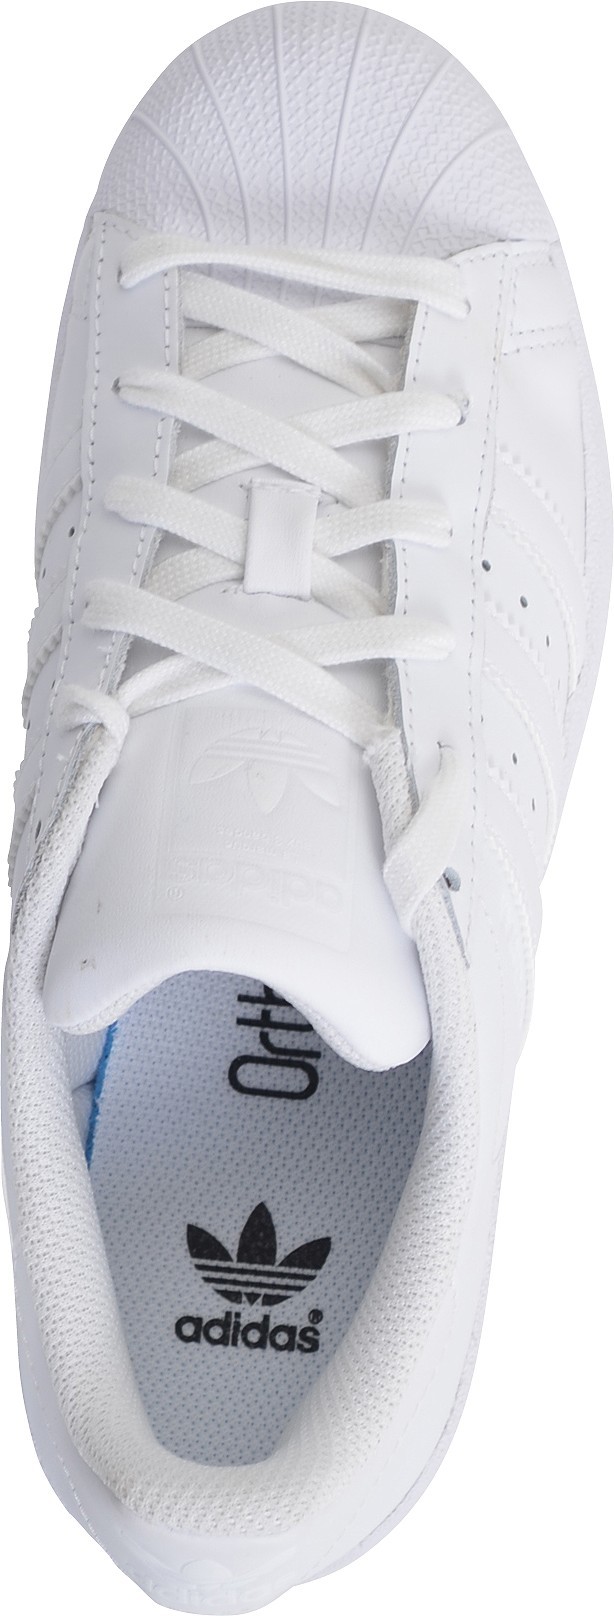 Adidas Unisex Superstar Foundation Sneakers in White & Blue